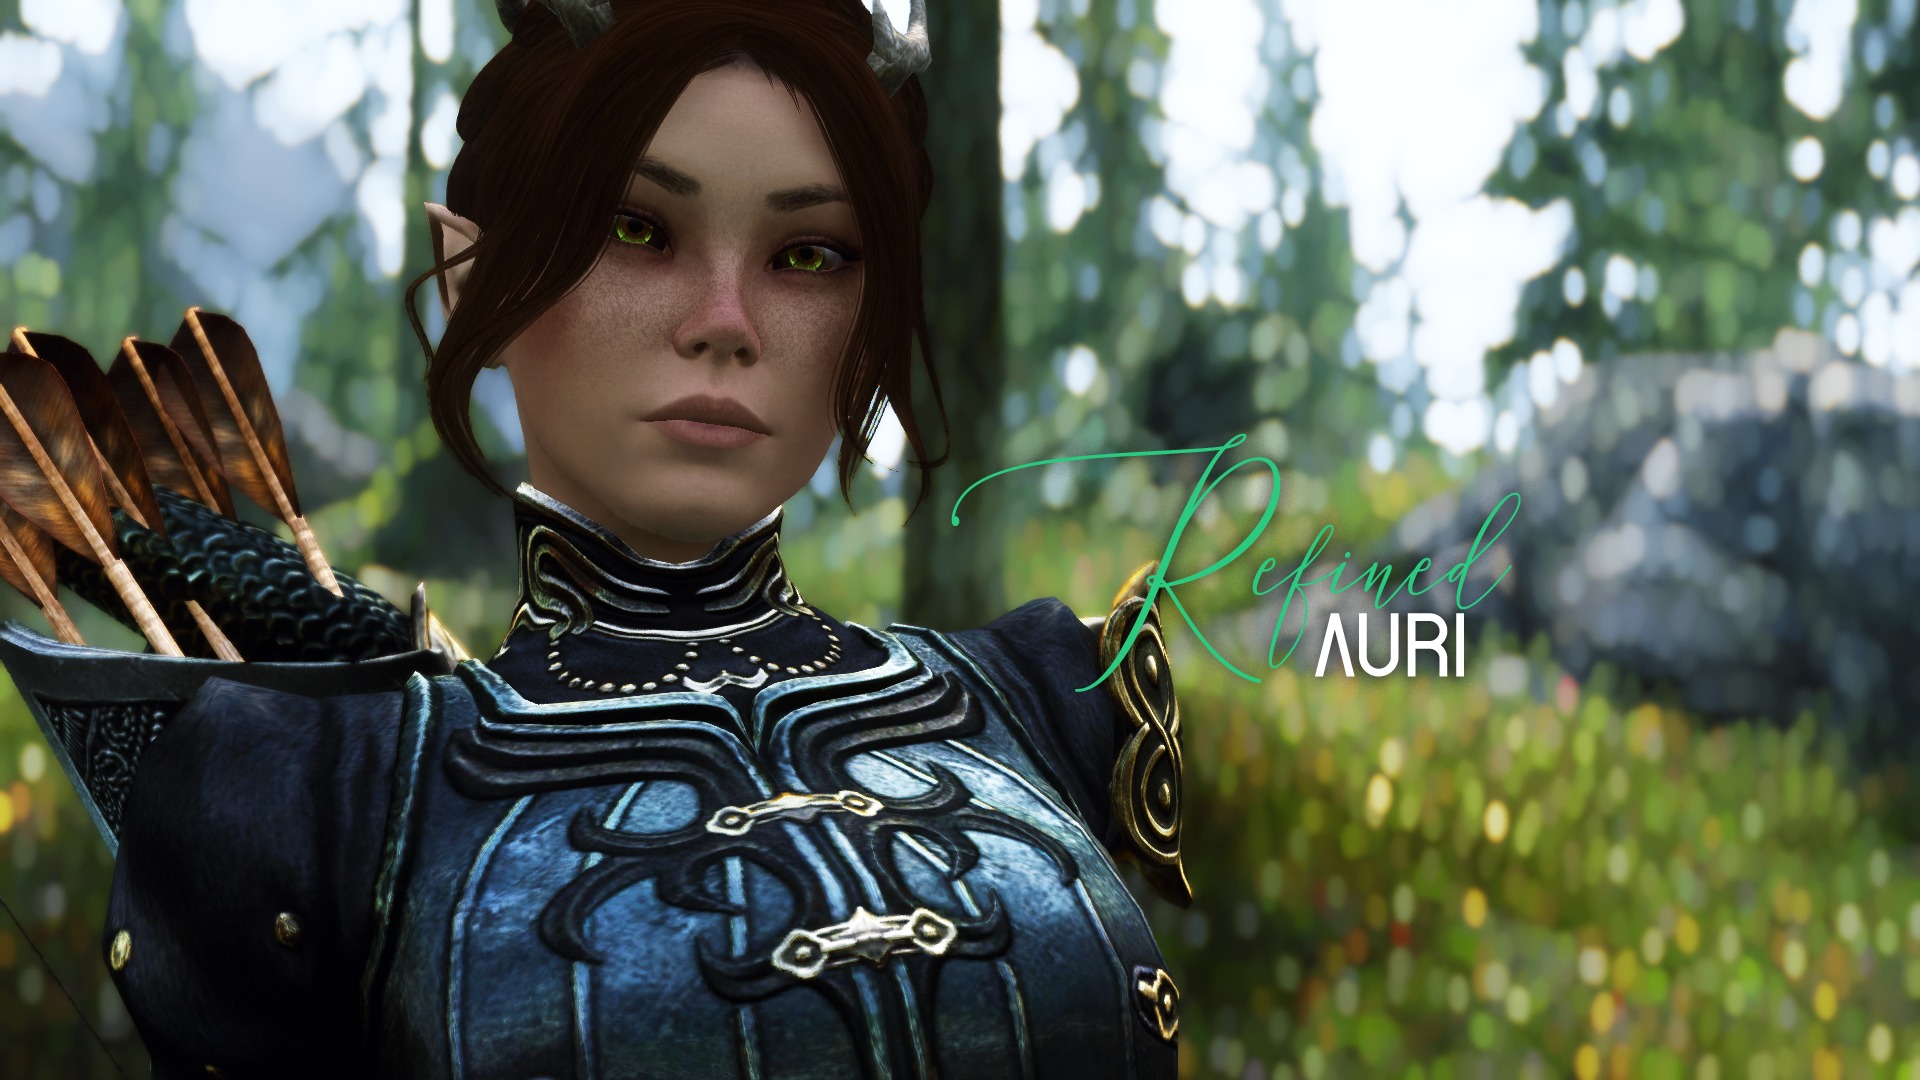 Refined Auri - Song of the Green フ ォ ロ ワ- - Skyrim Special Edition Mod. sou...